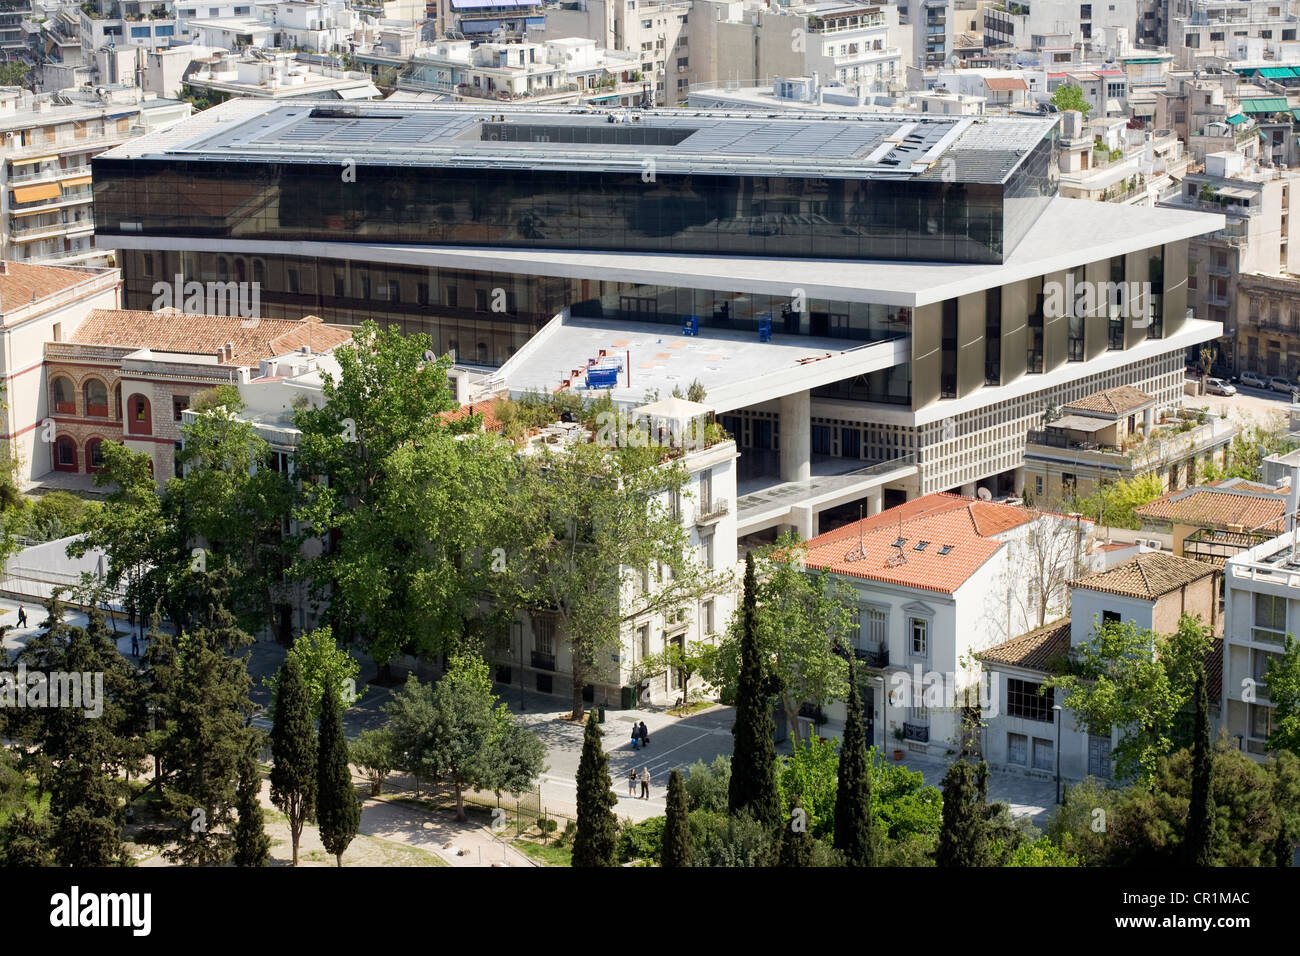 Greece, Attica, Athens, view from the Parthenon on the new Acropolis Museum by architect Bernard Tschumi inaugured in 2009 Stock Photo